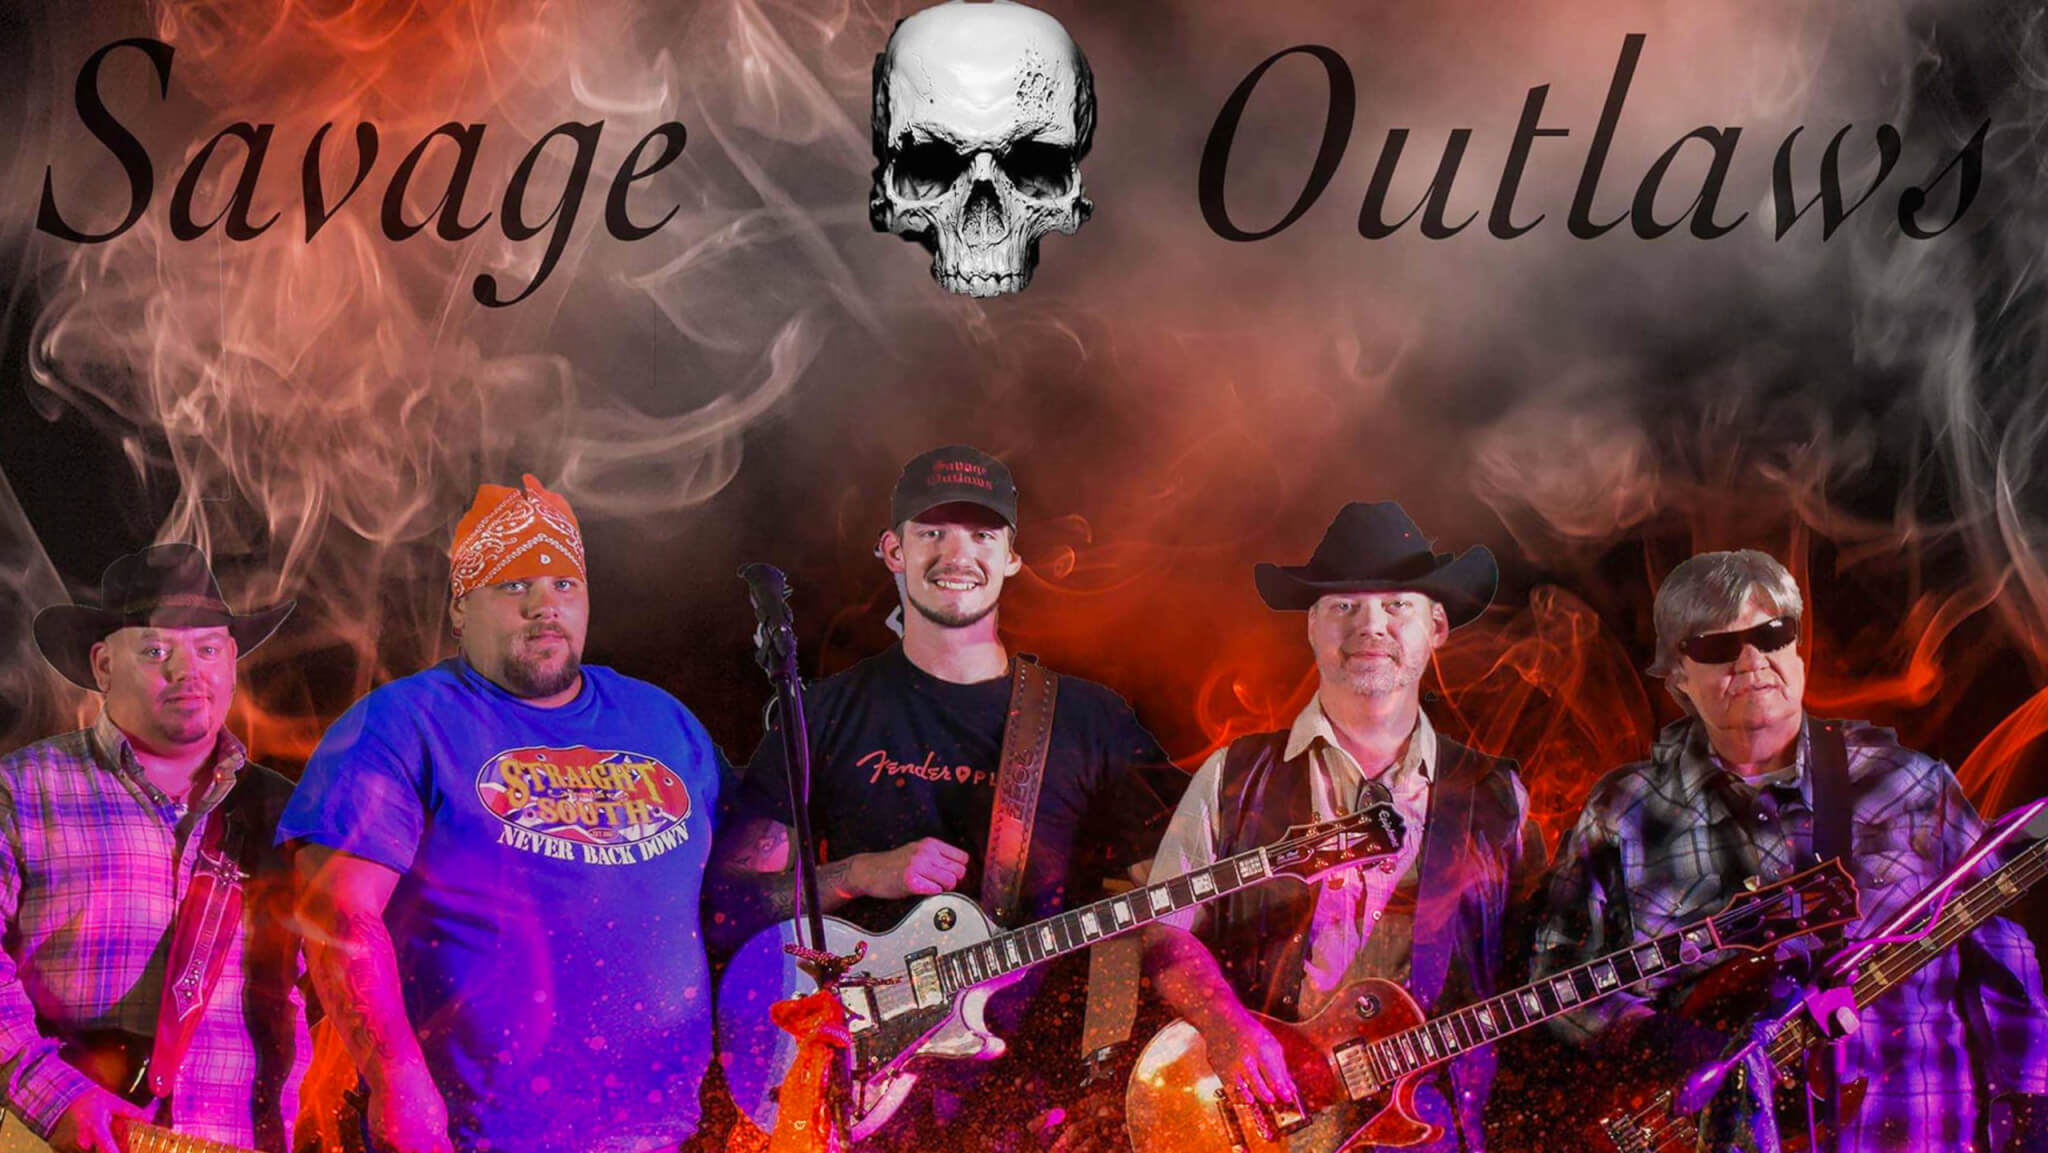 August 7: Savage Outlaws